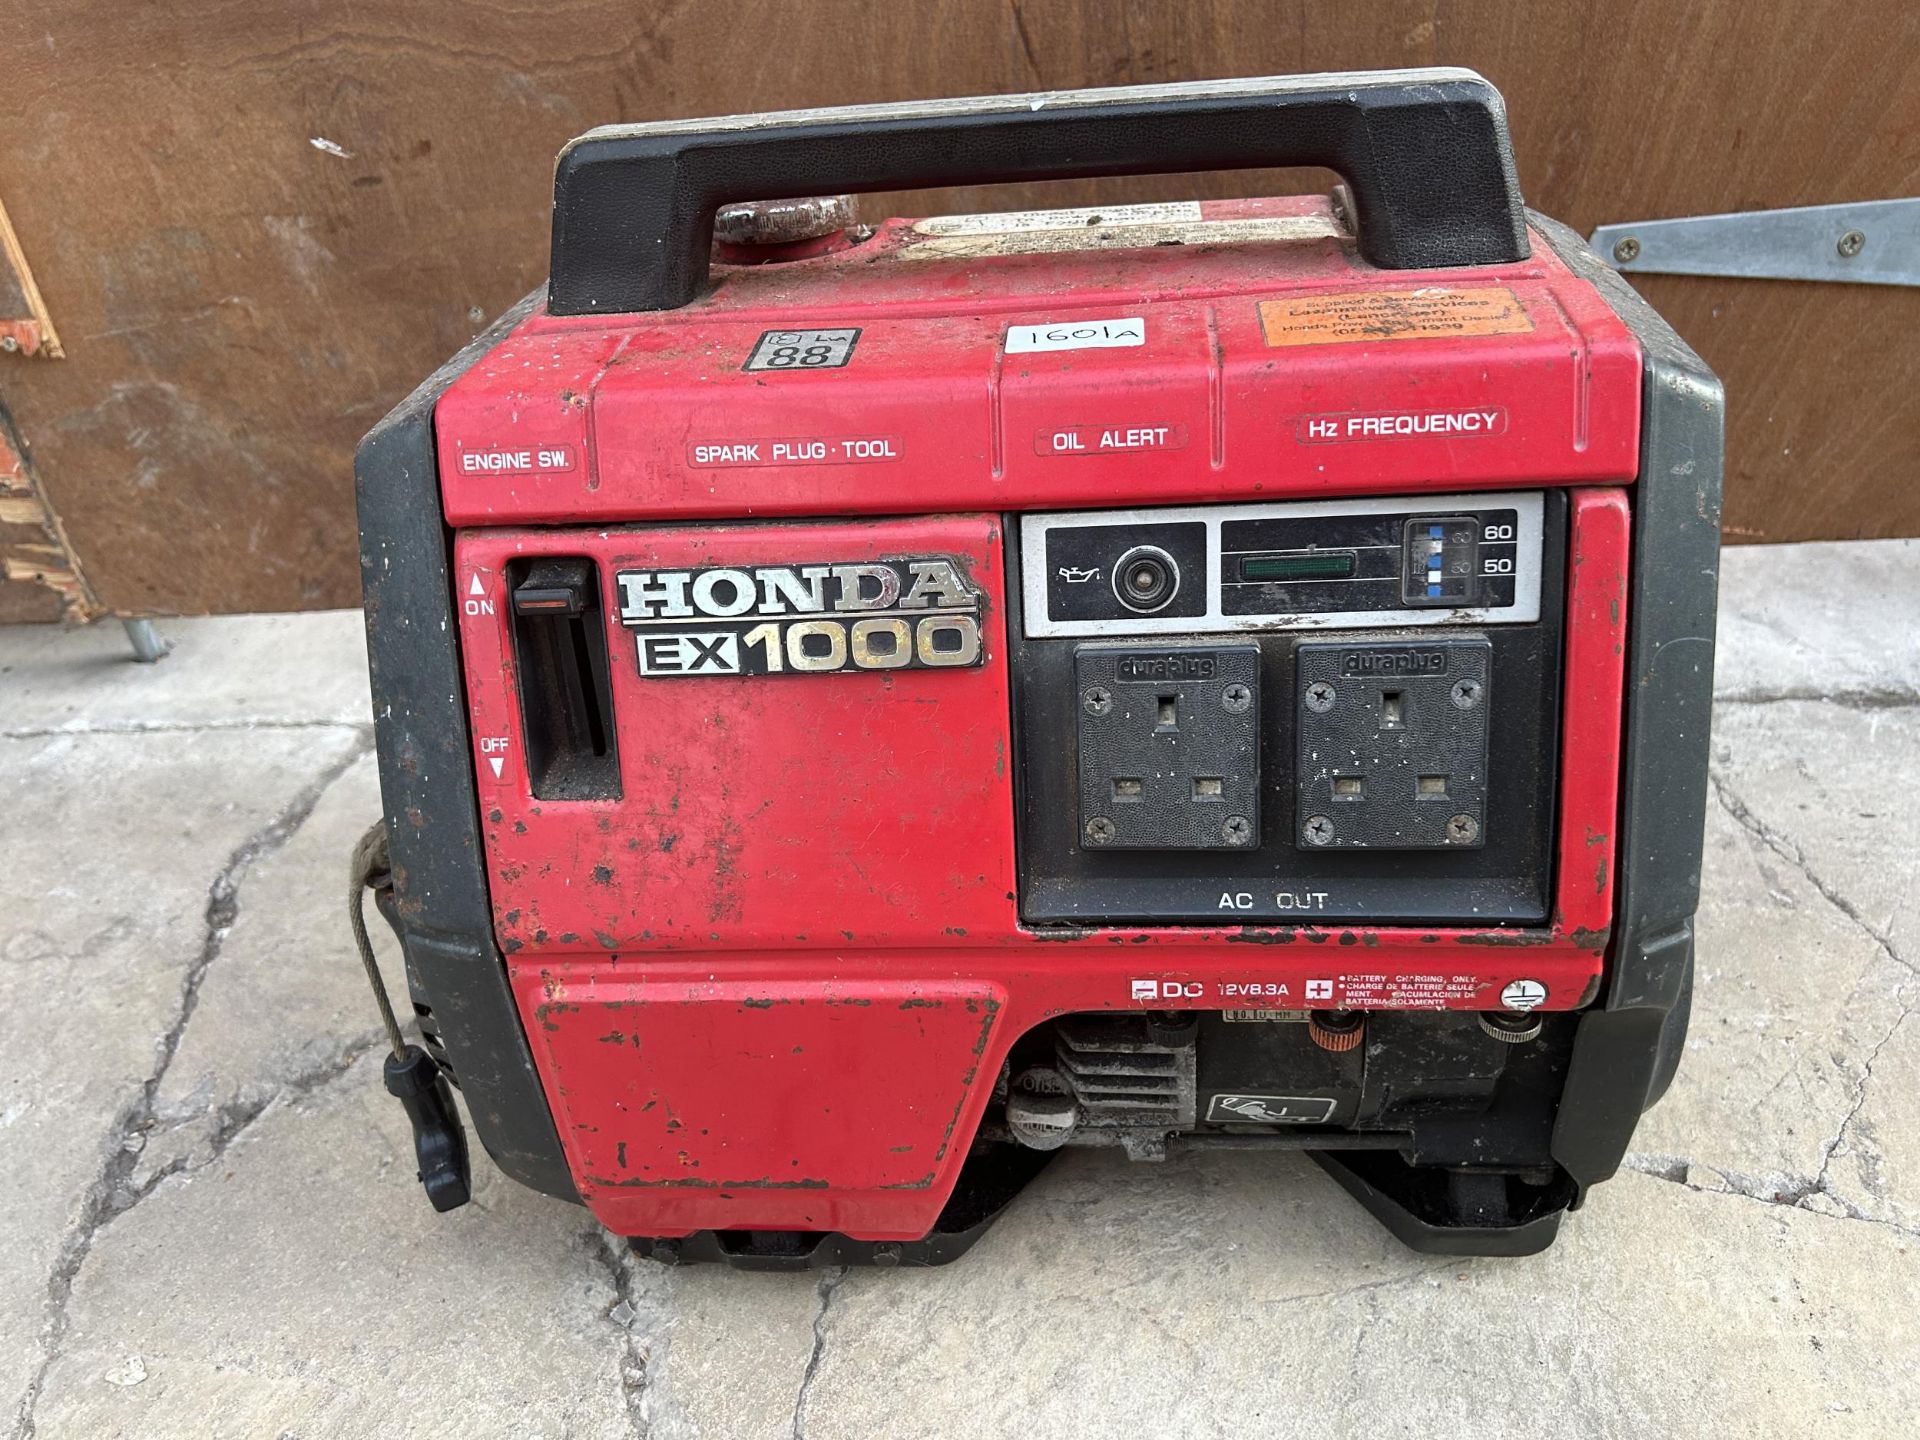 A PETROL HONDA EX1000 SUITCASE GENERATOR BELIEVED IN WORKING ORDER BUT NO WARRANTY GIVEN